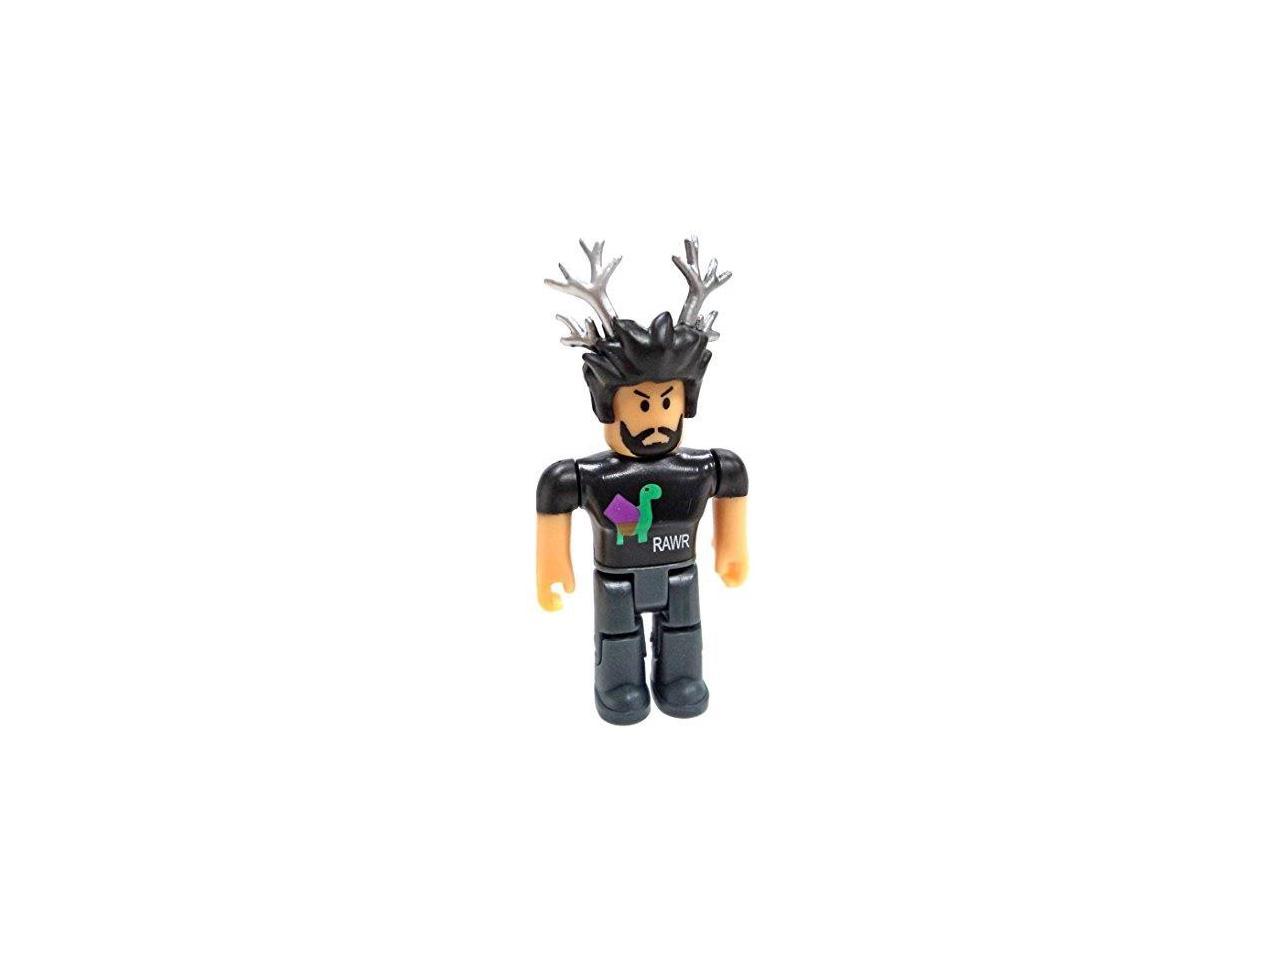 Roblox Series 2 Defaultio Action Figure Mystery Box Virtual Item Code 2 5 Newegg Com - mystery box roblox toy codes